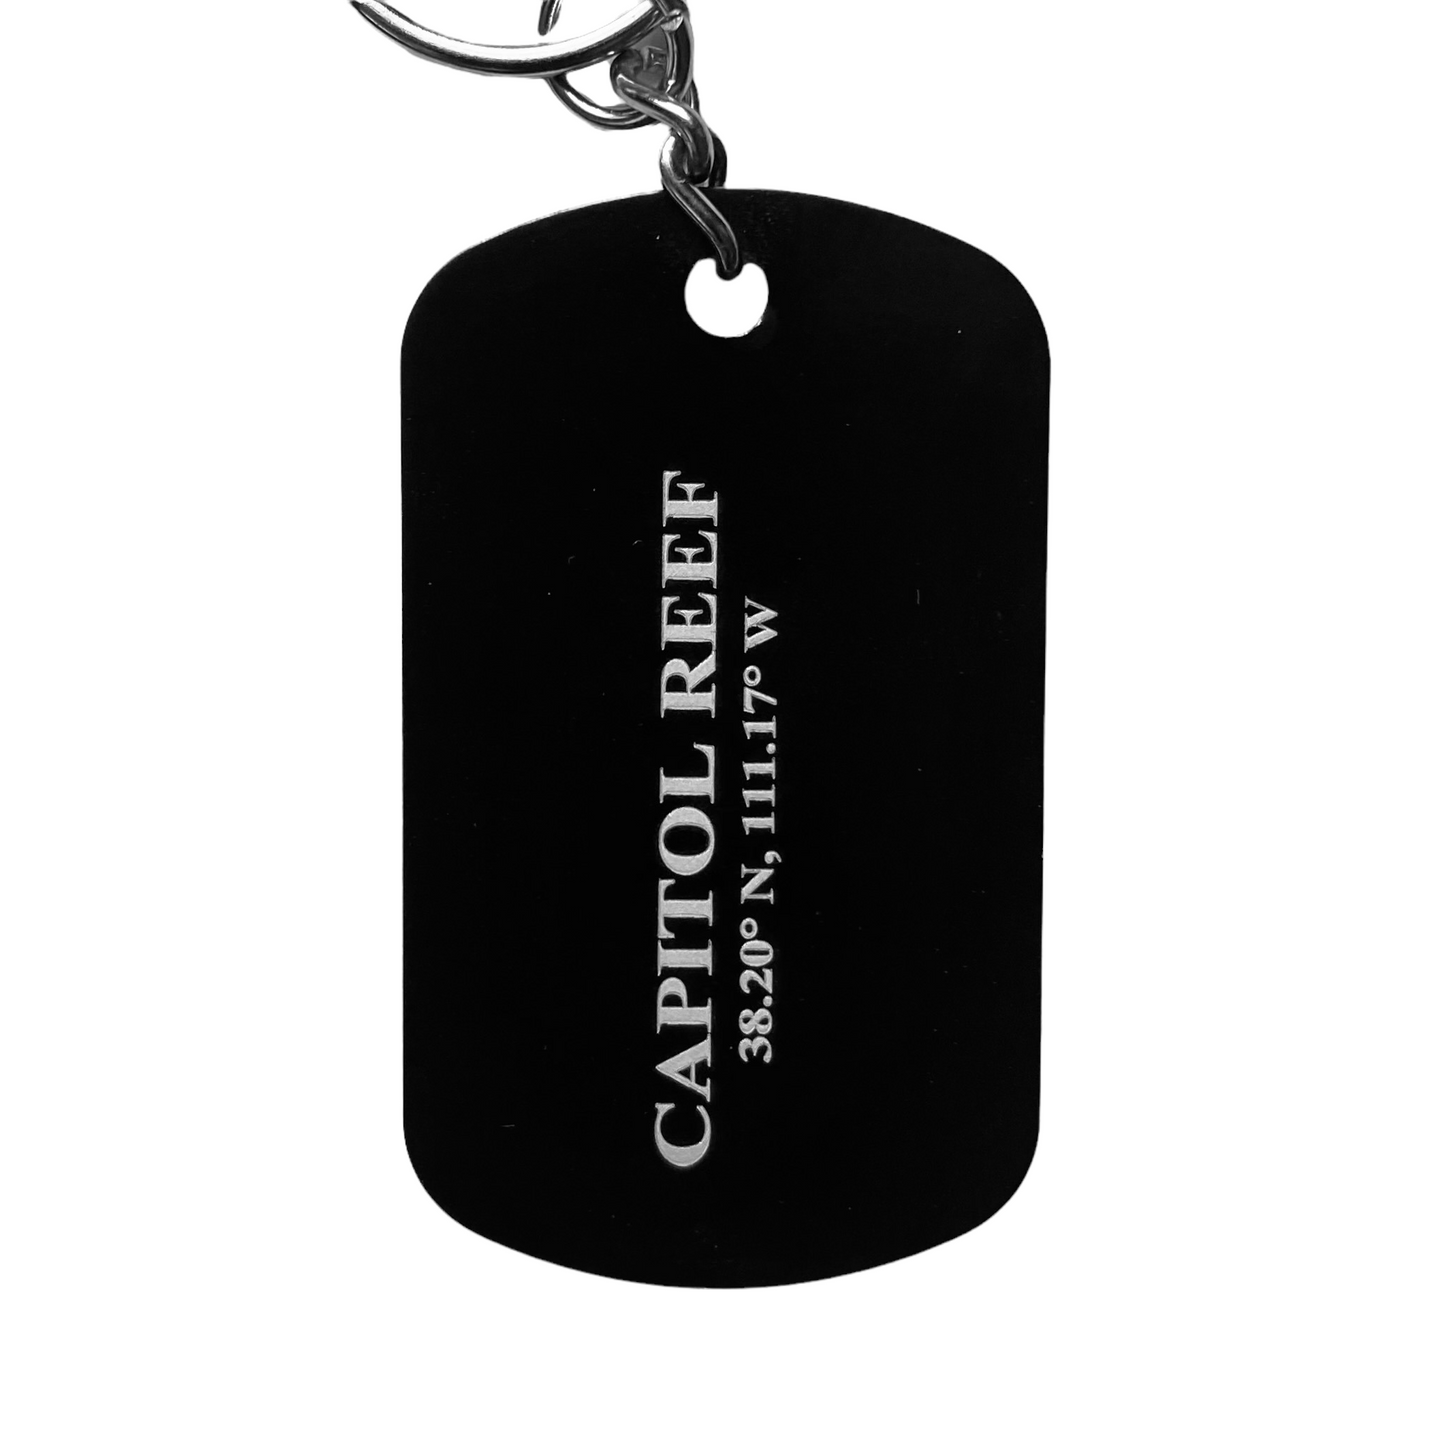 Capitol Reef, Keychain